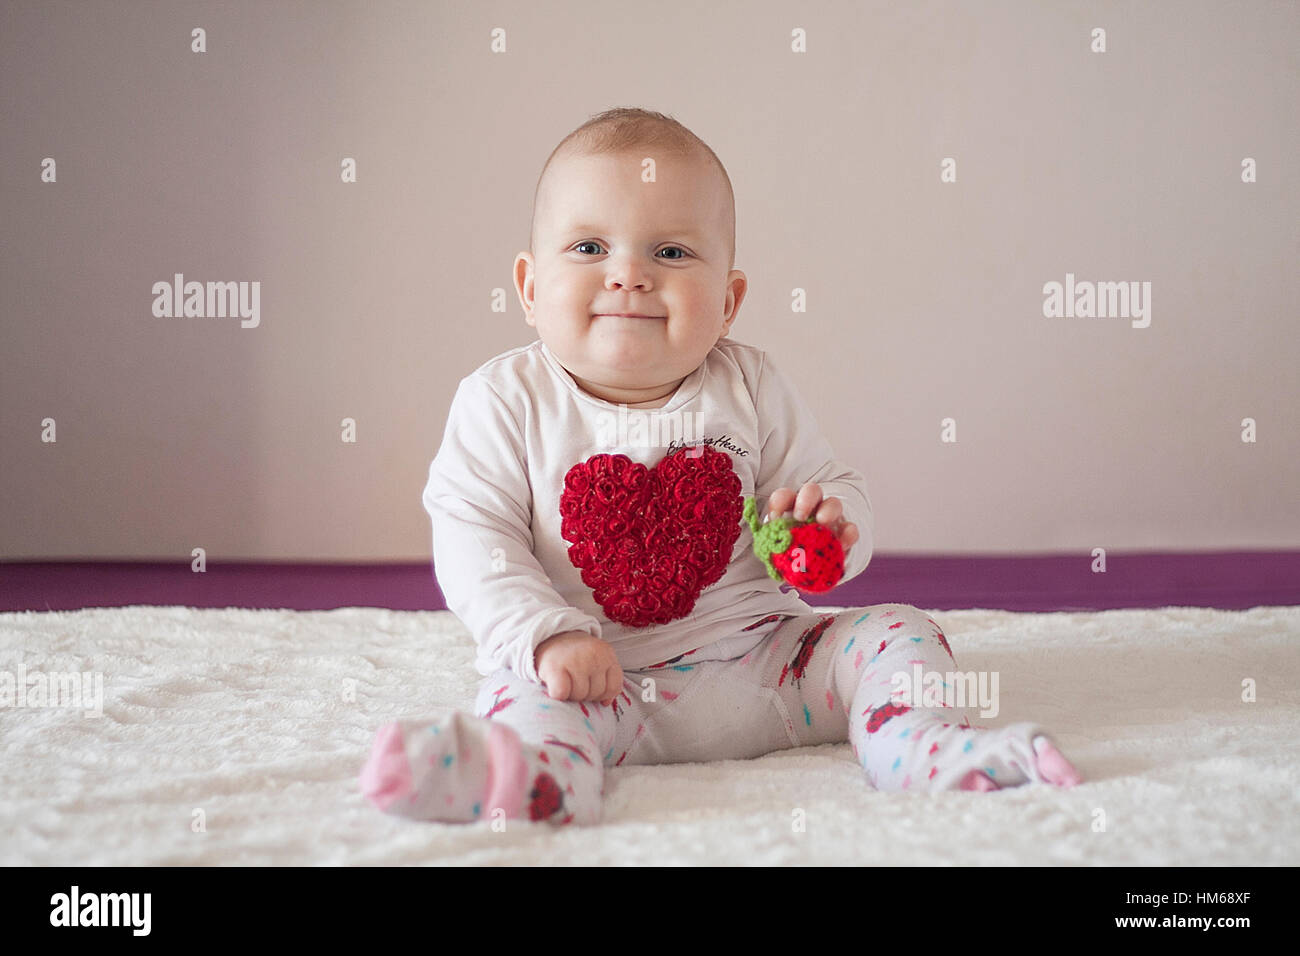 Smiling baby girl with heart on her t-shirt and strawberry in her hands. White bright background. Stock Photo